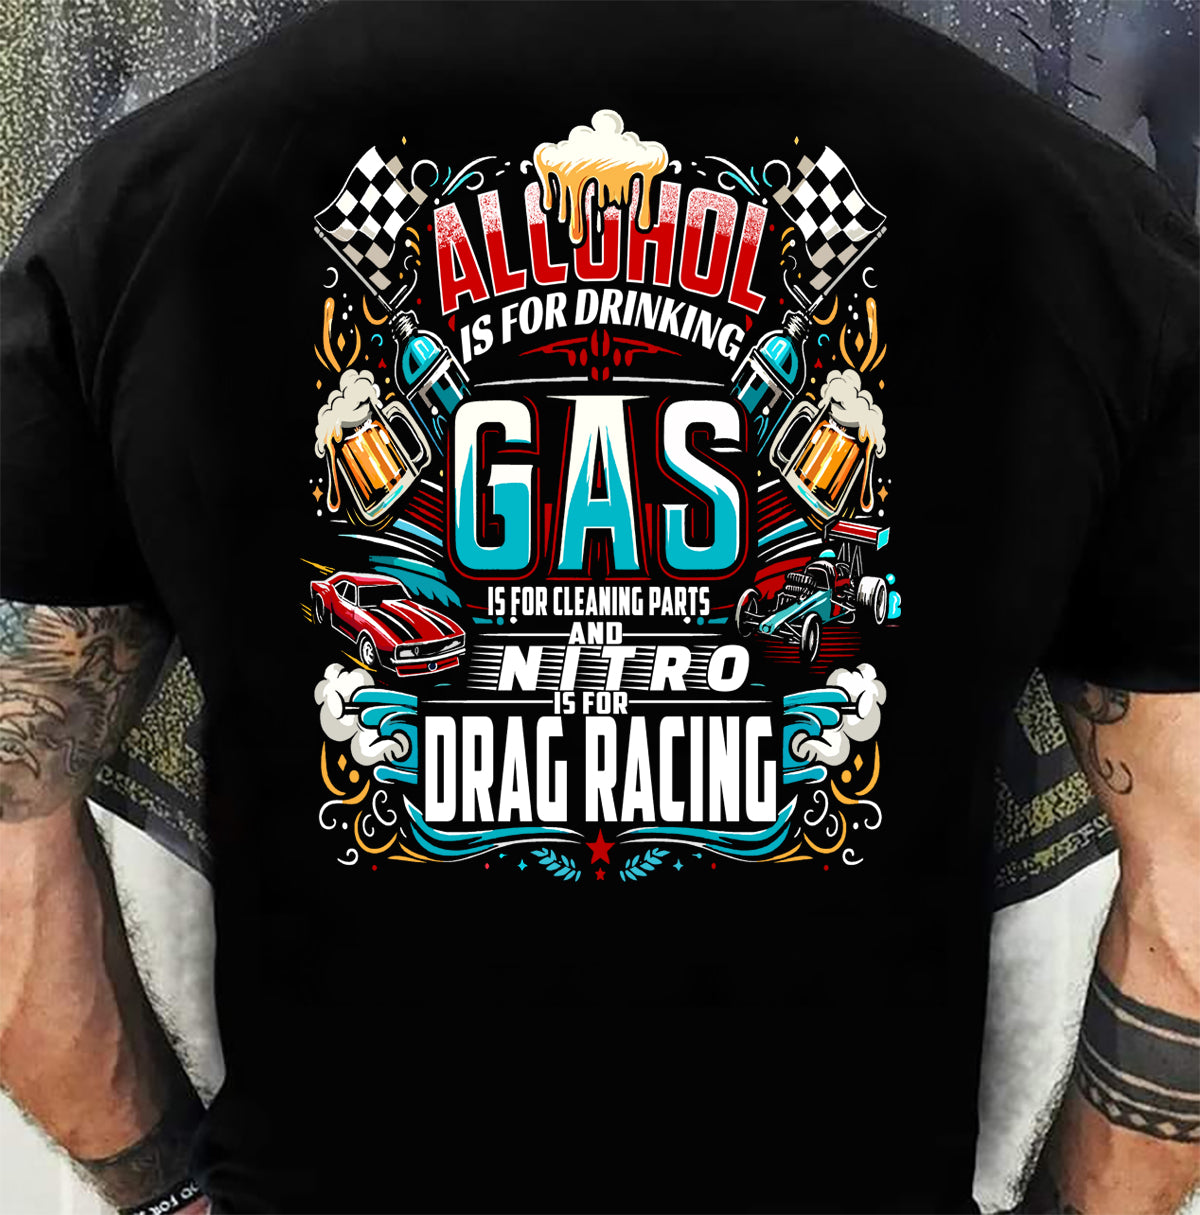 Nitro is for Drag Racing Men's T-shirts